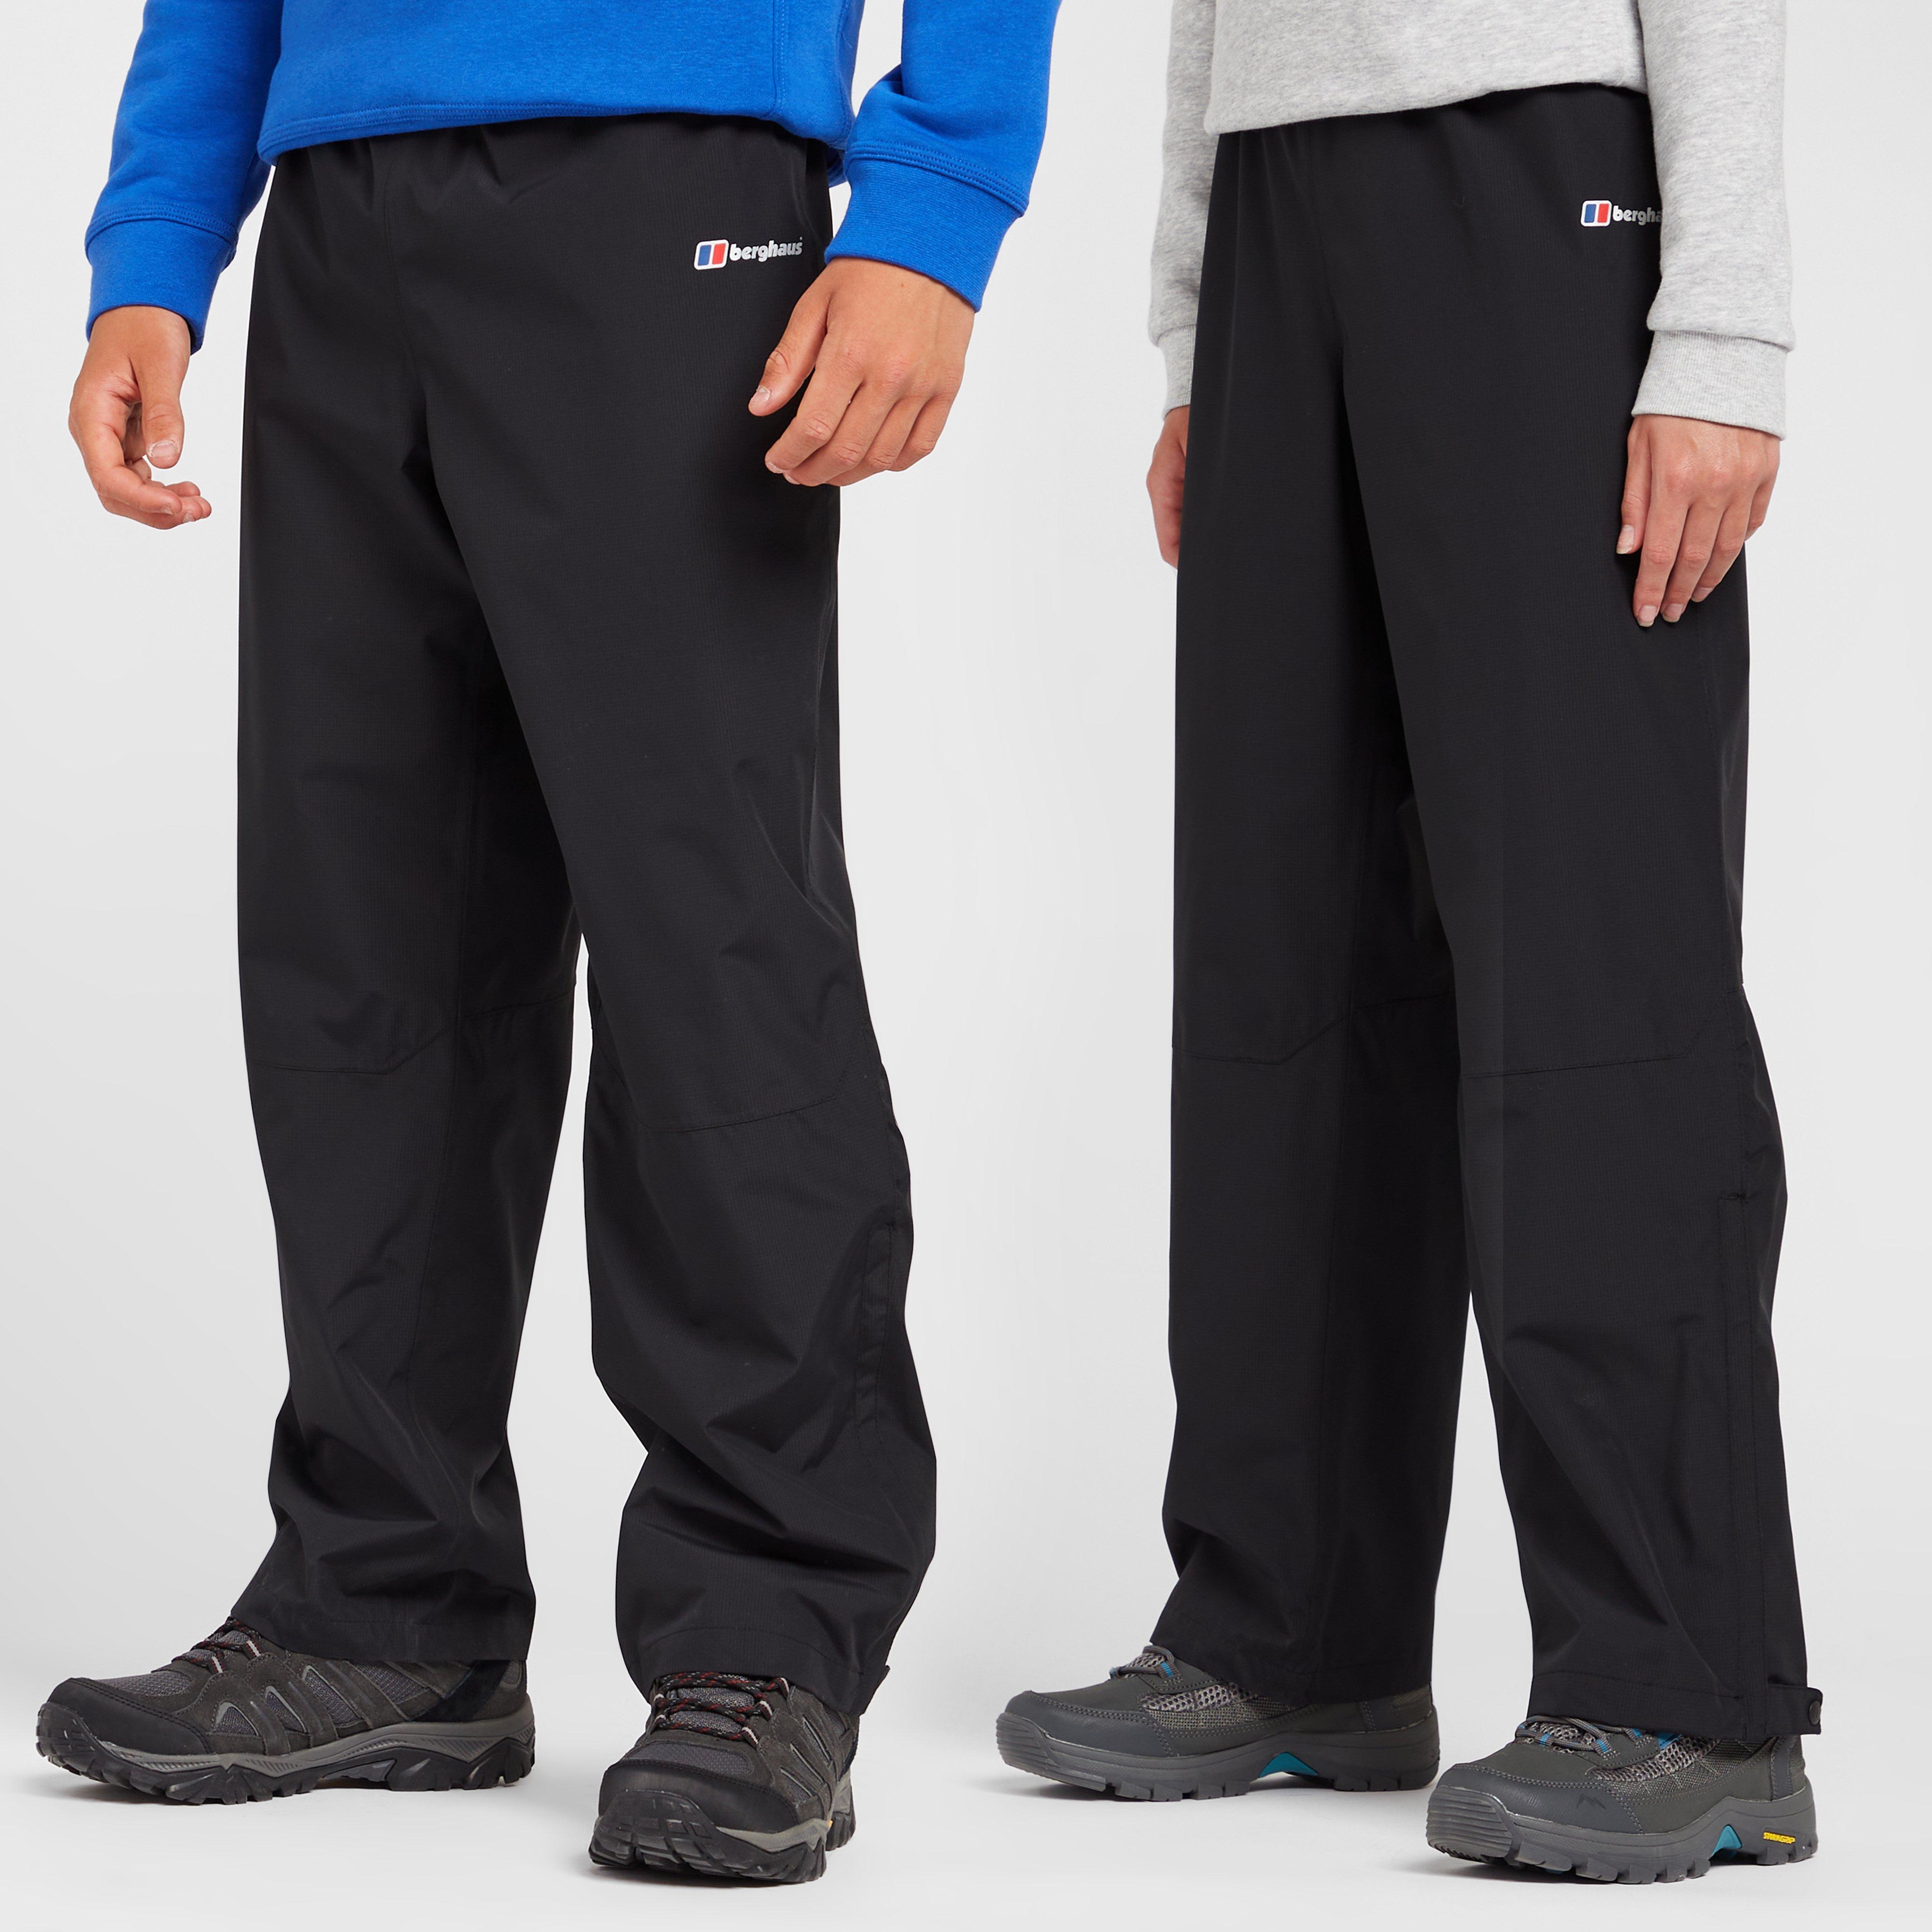 childrens walking trousers